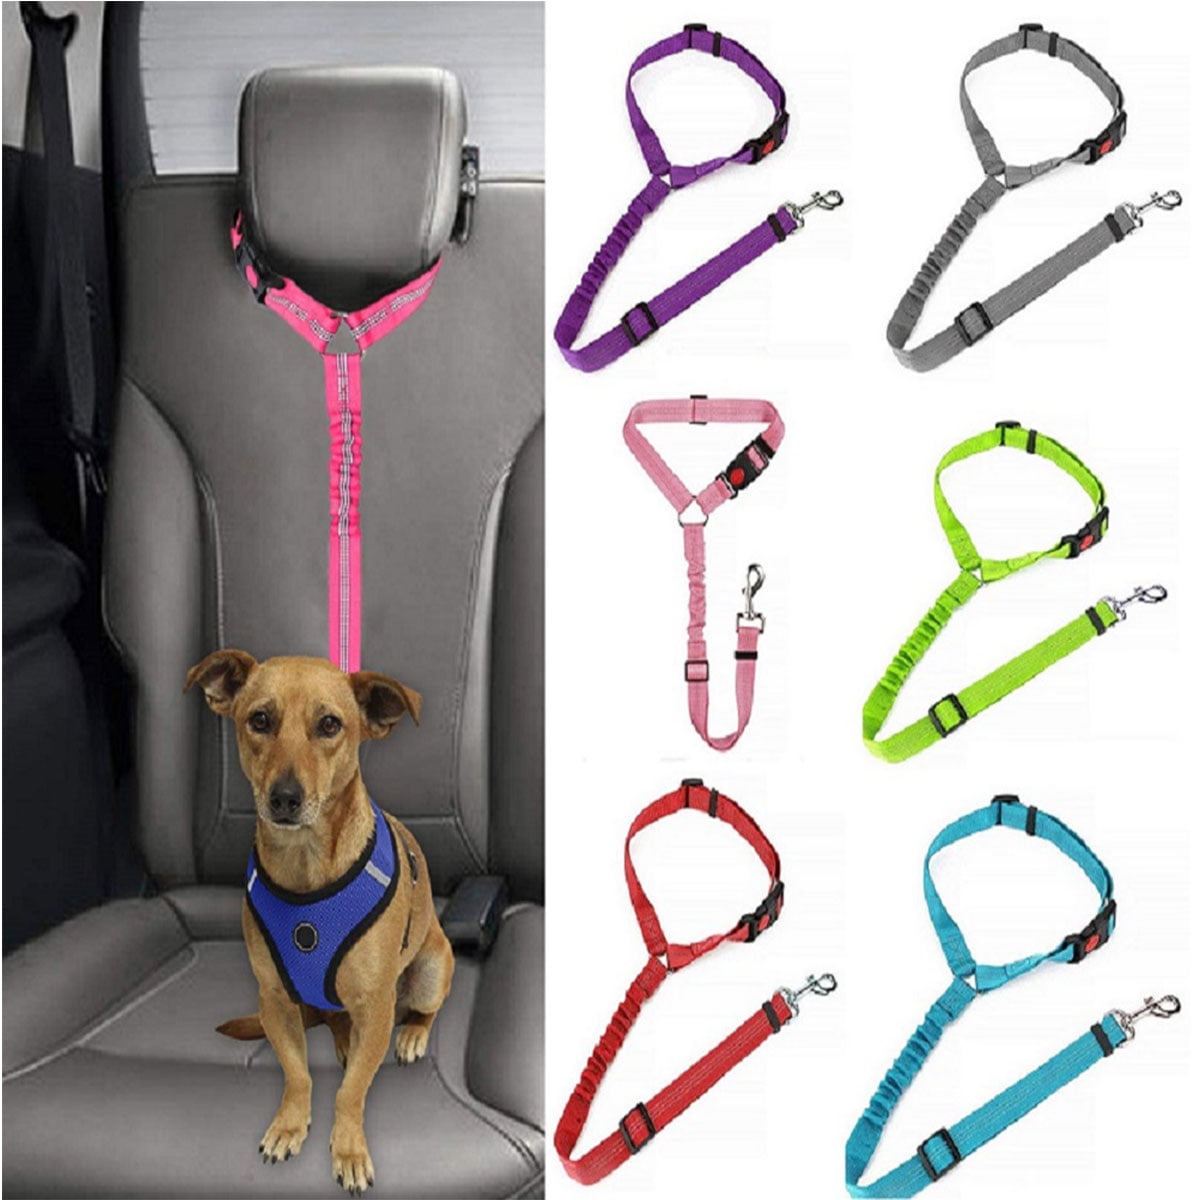 black Adjustable 2 Pack Premium Dog Seat Belt for Car with Bungee Buffer Safety Heavy Duty elastic Leads Harness for Cars Elastic Bungee Buffer to prevent your puppy from shock attenuation 